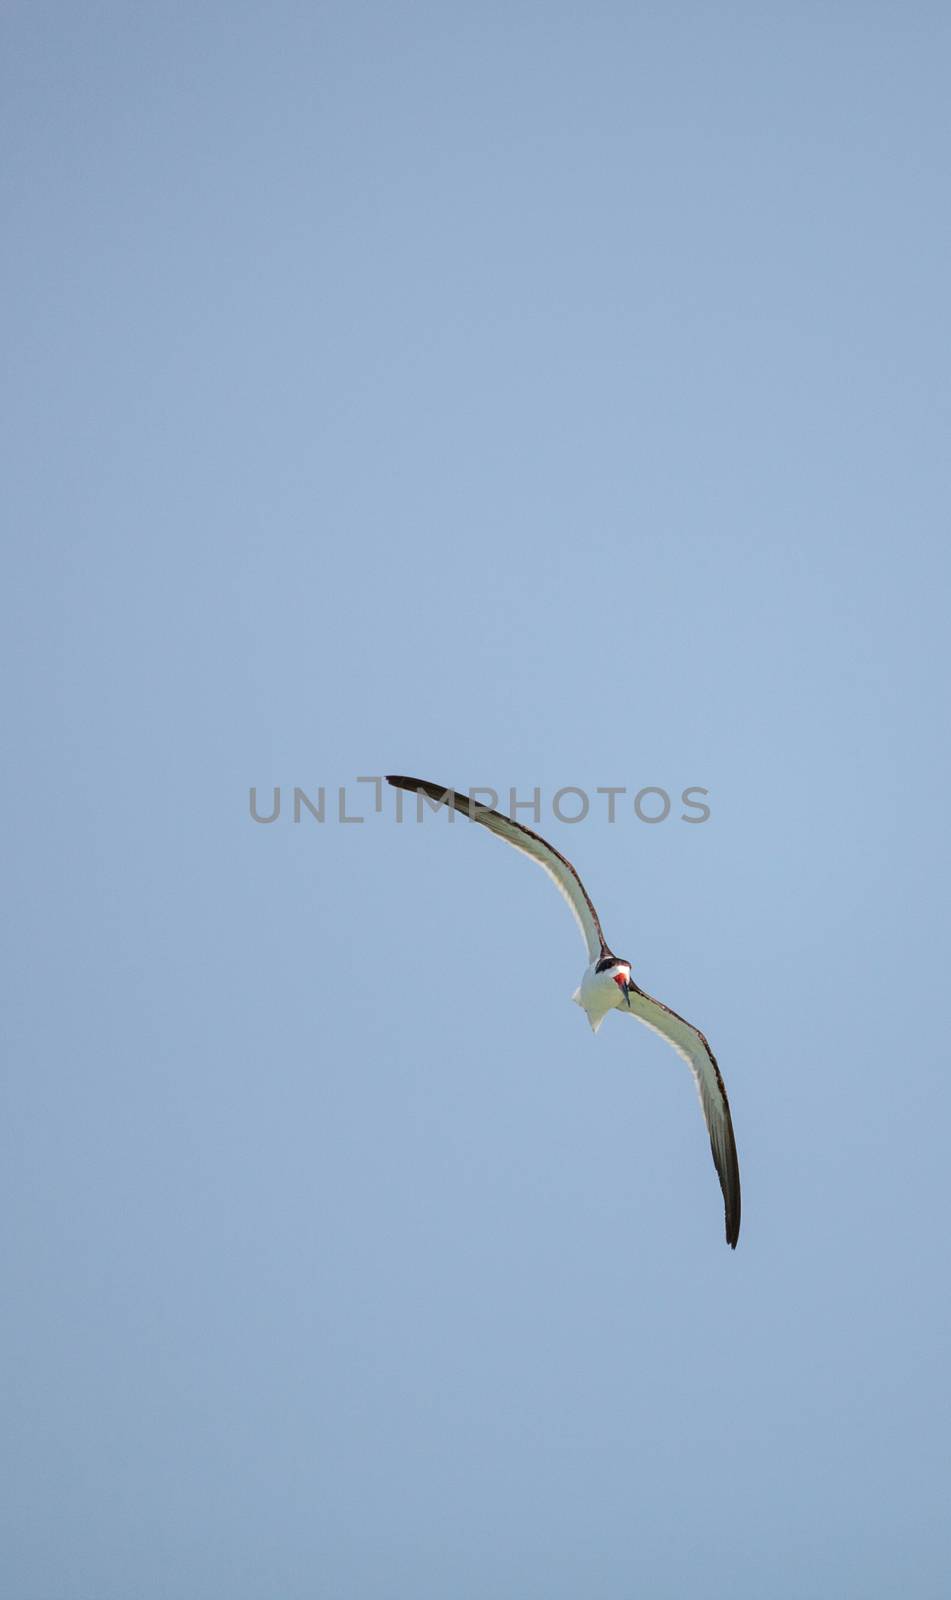 Black skimmer tern Rynchops niger skims the ocean for food at Clam Pass in Naples, Florida